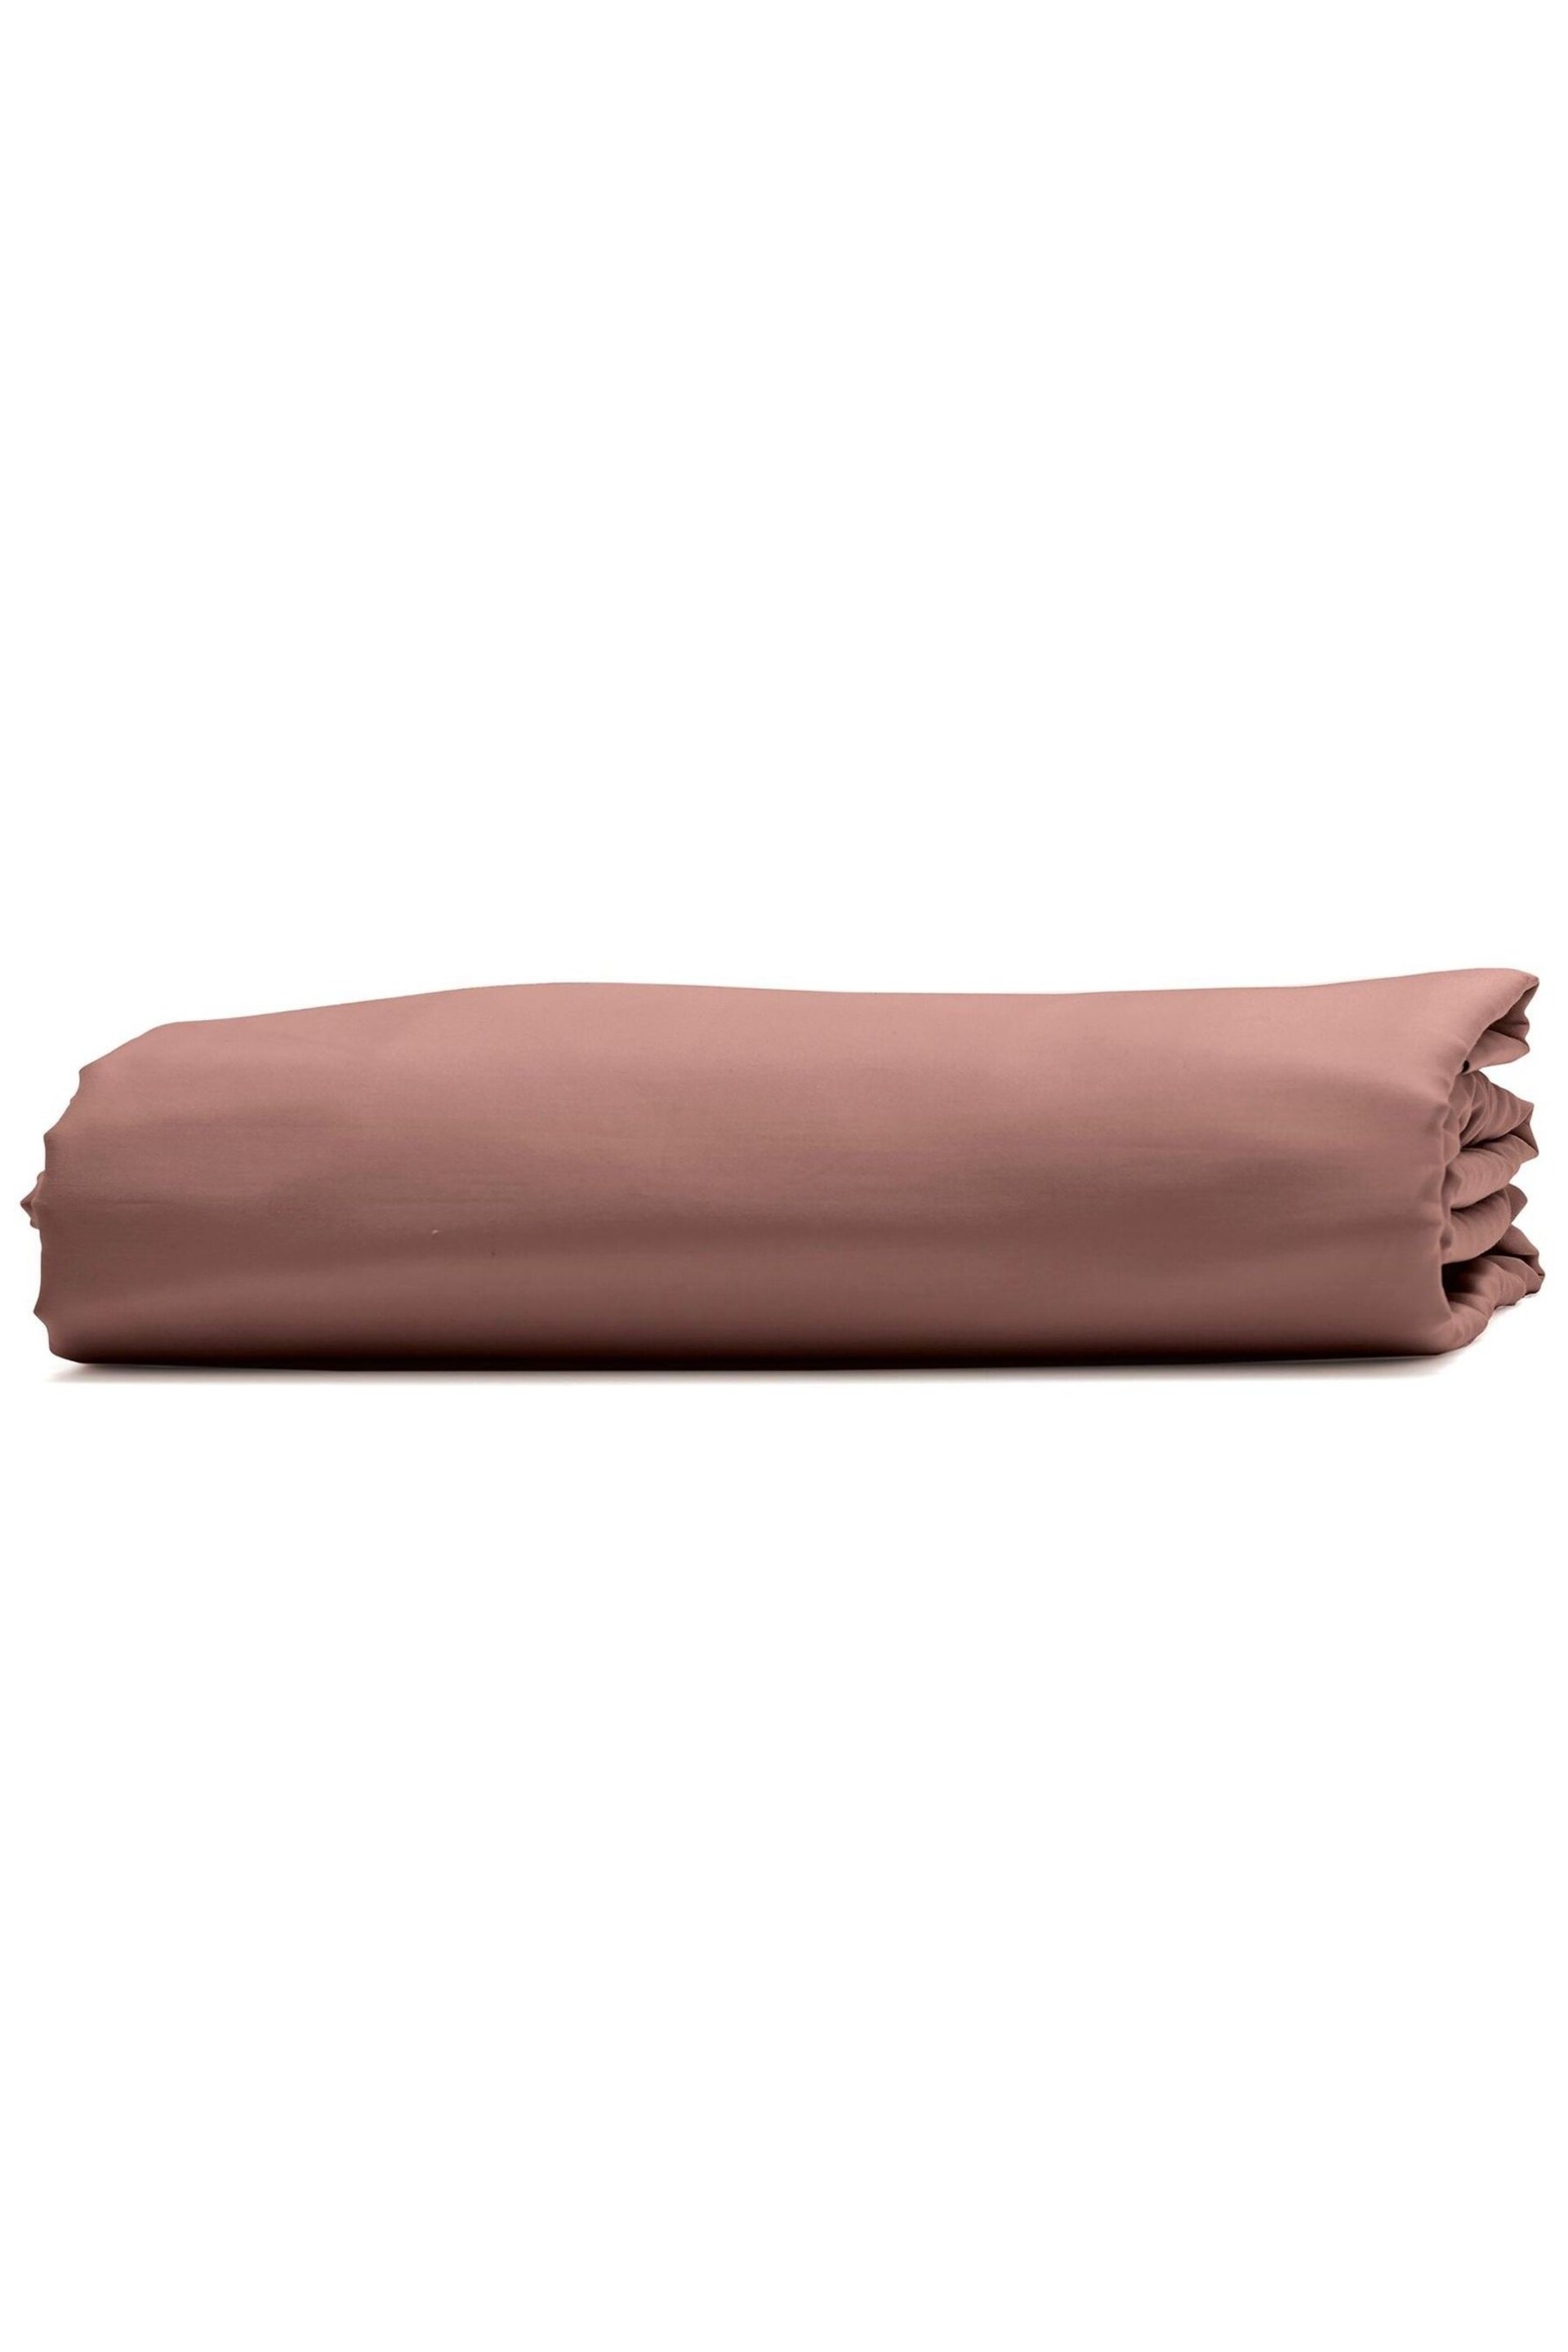 Bedfolk Orange Luxe Cotton Deep Fitted Sheet - Image 4 of 4